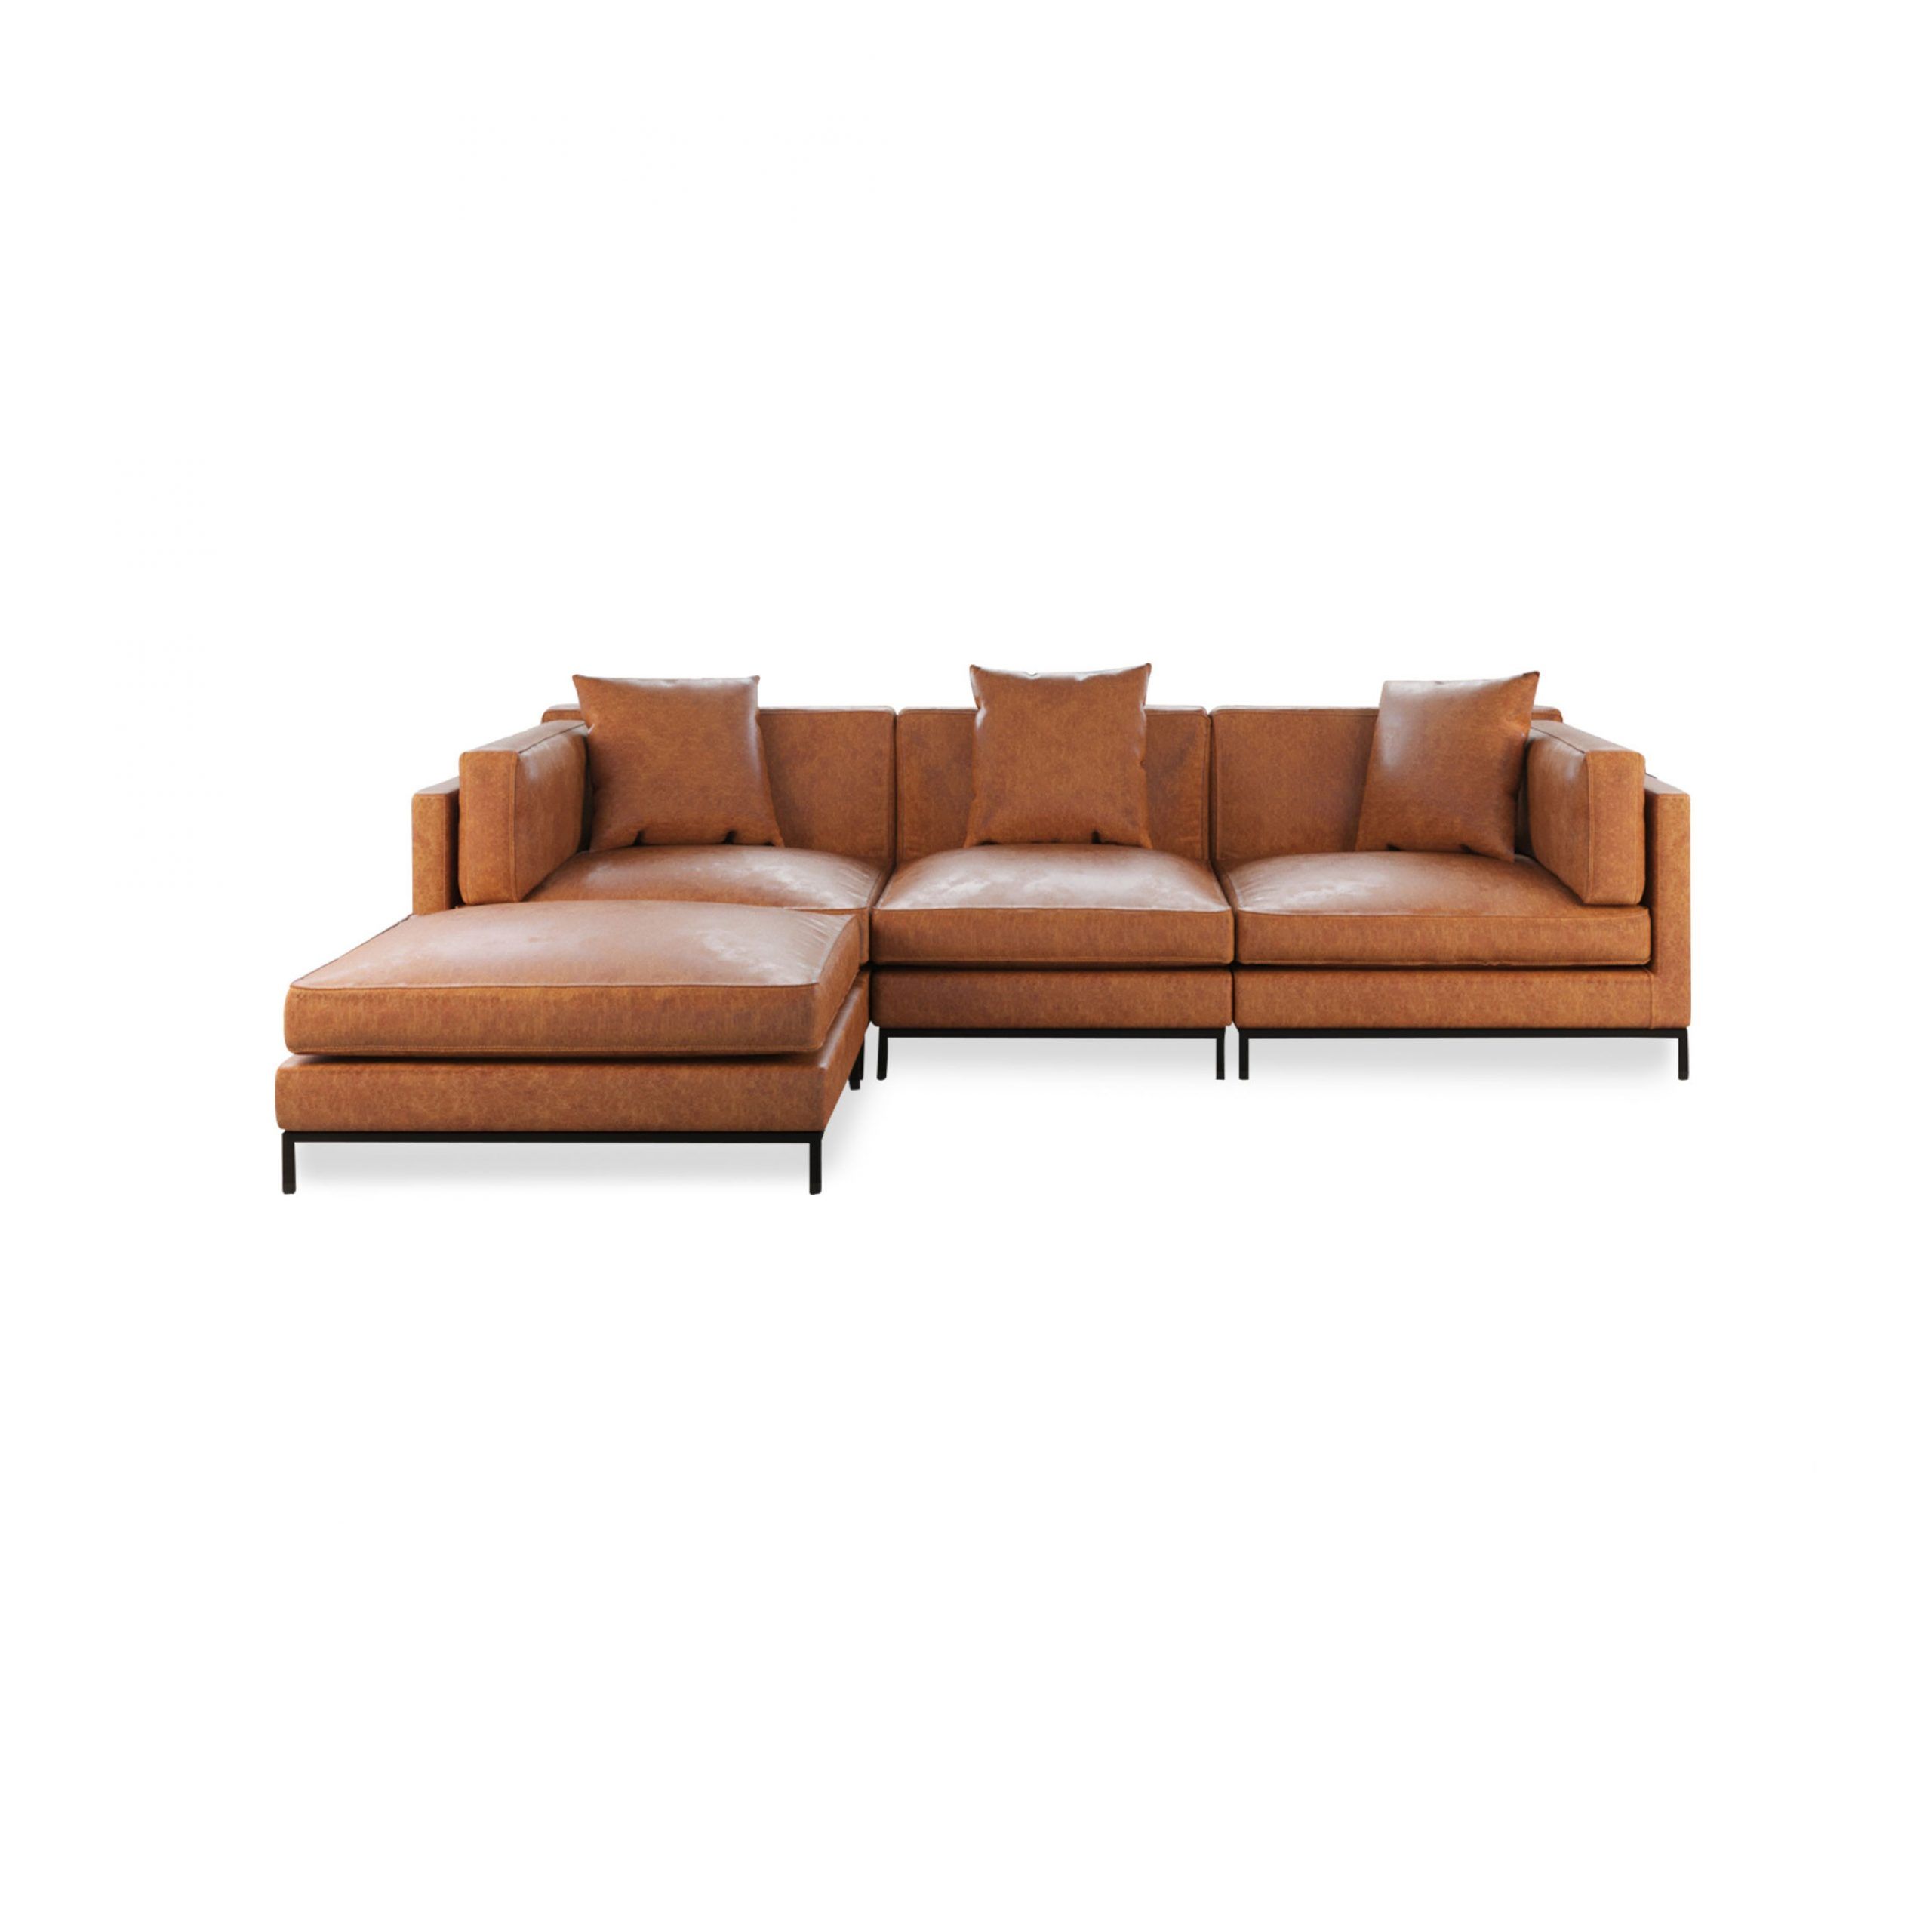 Migliore Sectional – Best Leather Or Fabric Modular Sofa Pertaining To Paul Modular Sectional Sofas Blue (View 8 of 15)